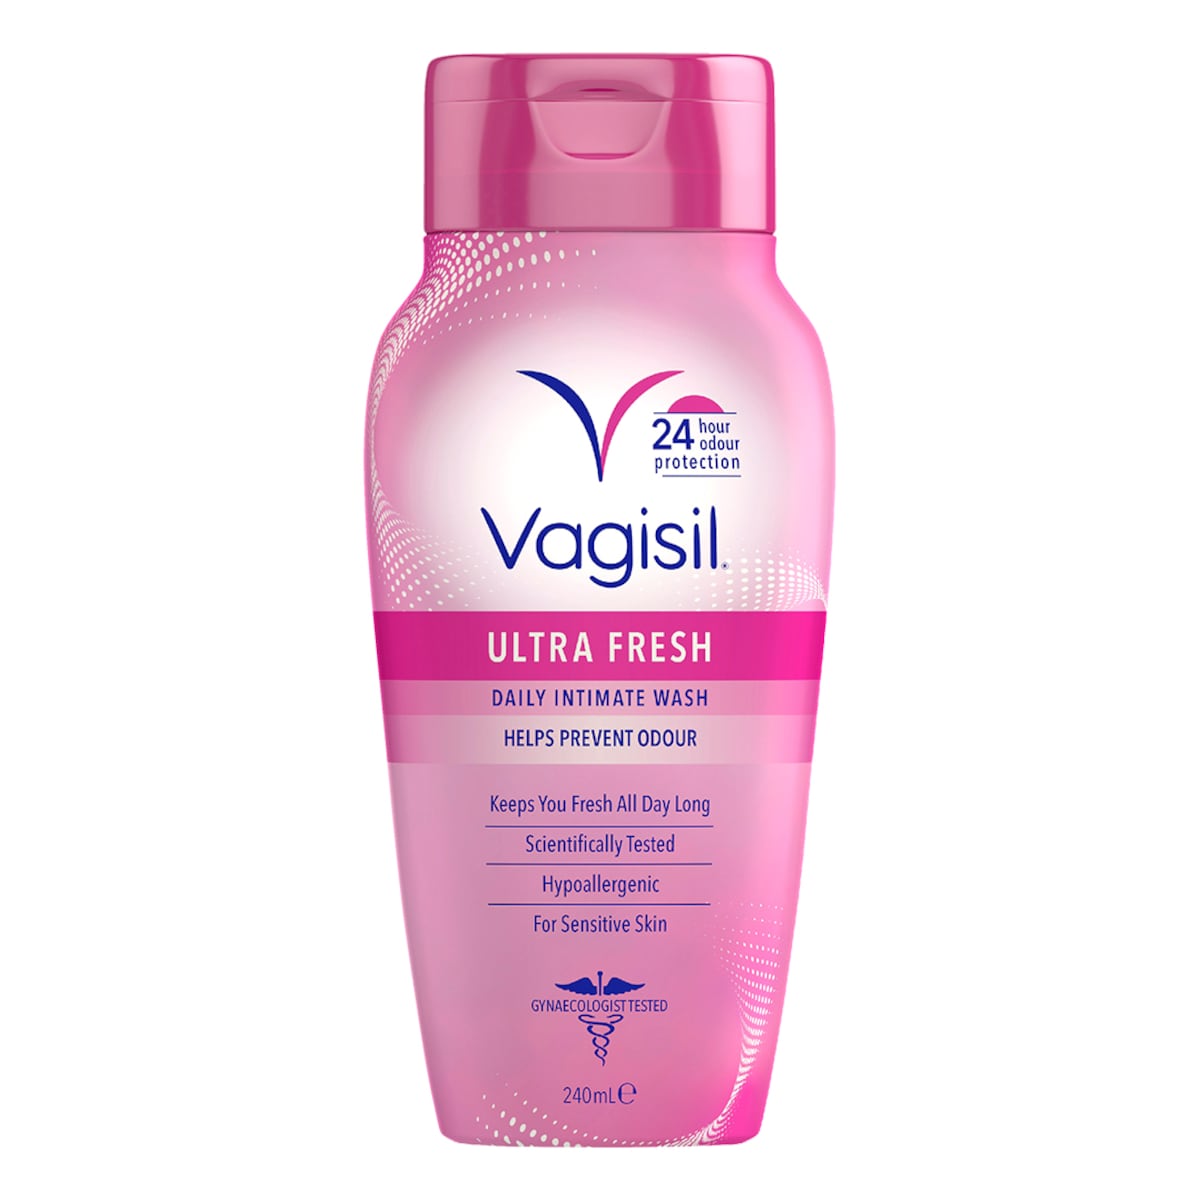 Vagisil Ultra Fresh Daily Intimate Wash 240ml